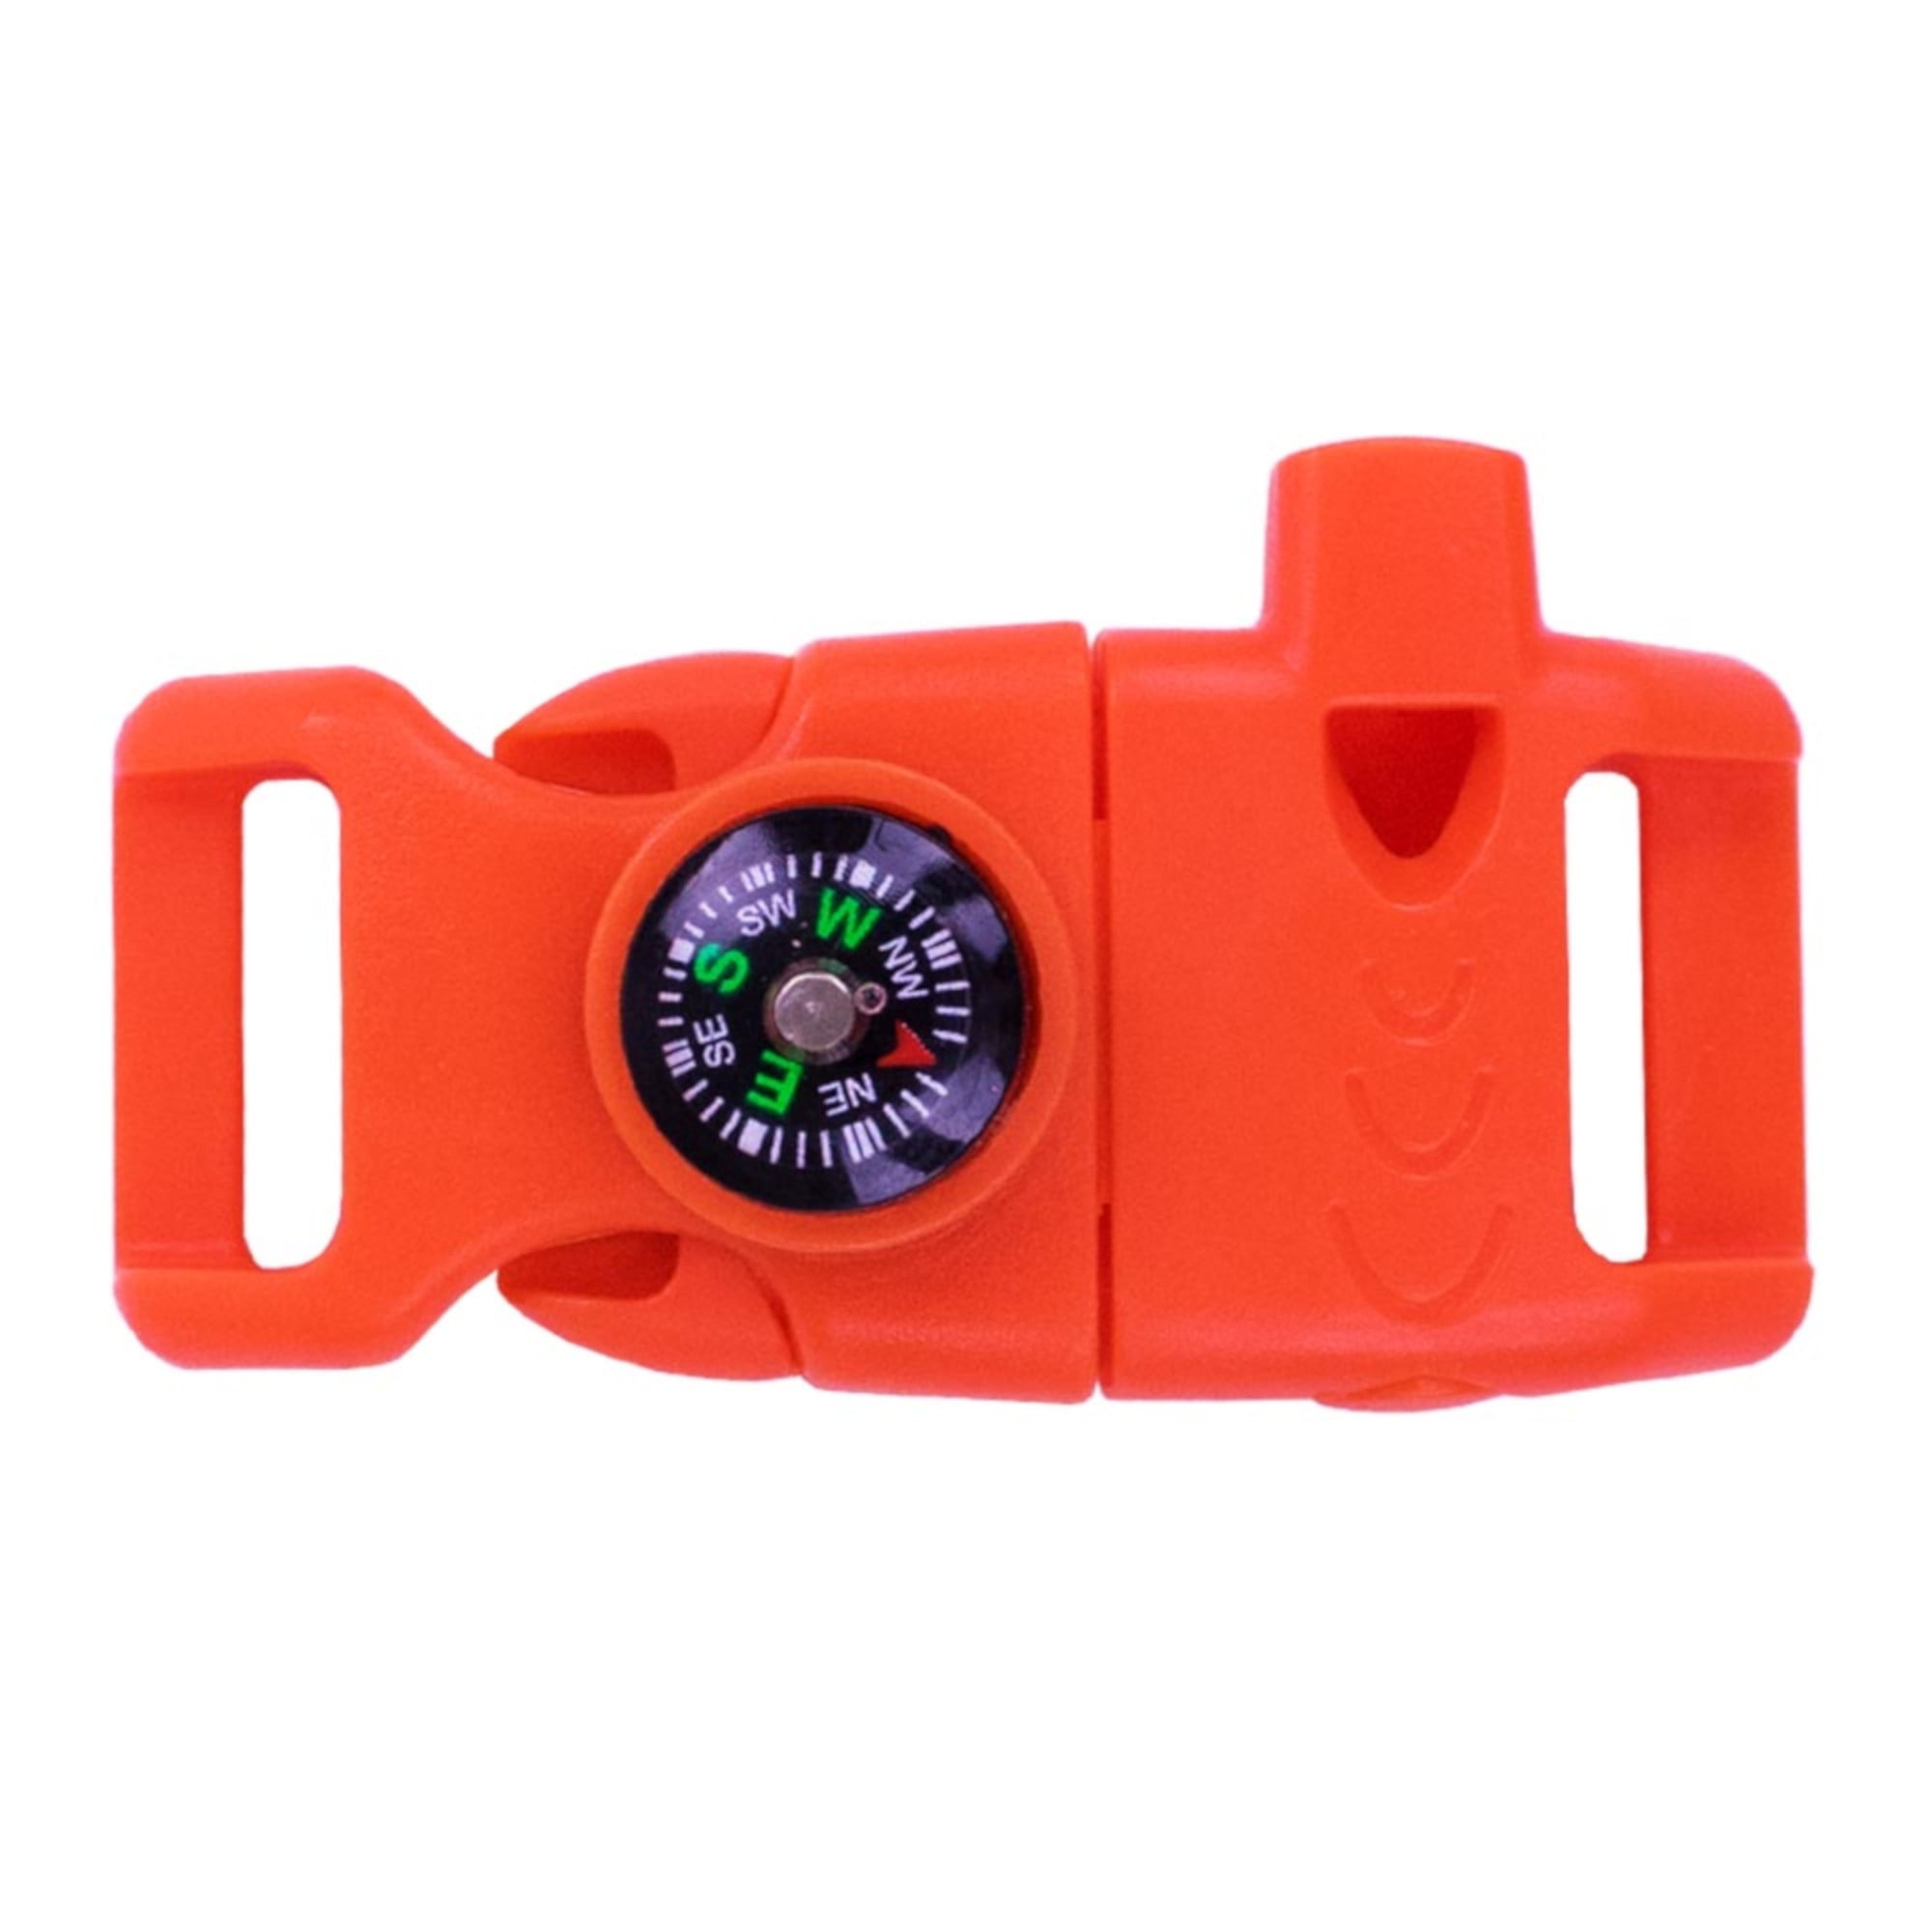 Black Mini Survival Tool Whistle Compass 2 in1 new hot selling NzTEUSTEUSWMH F~ 